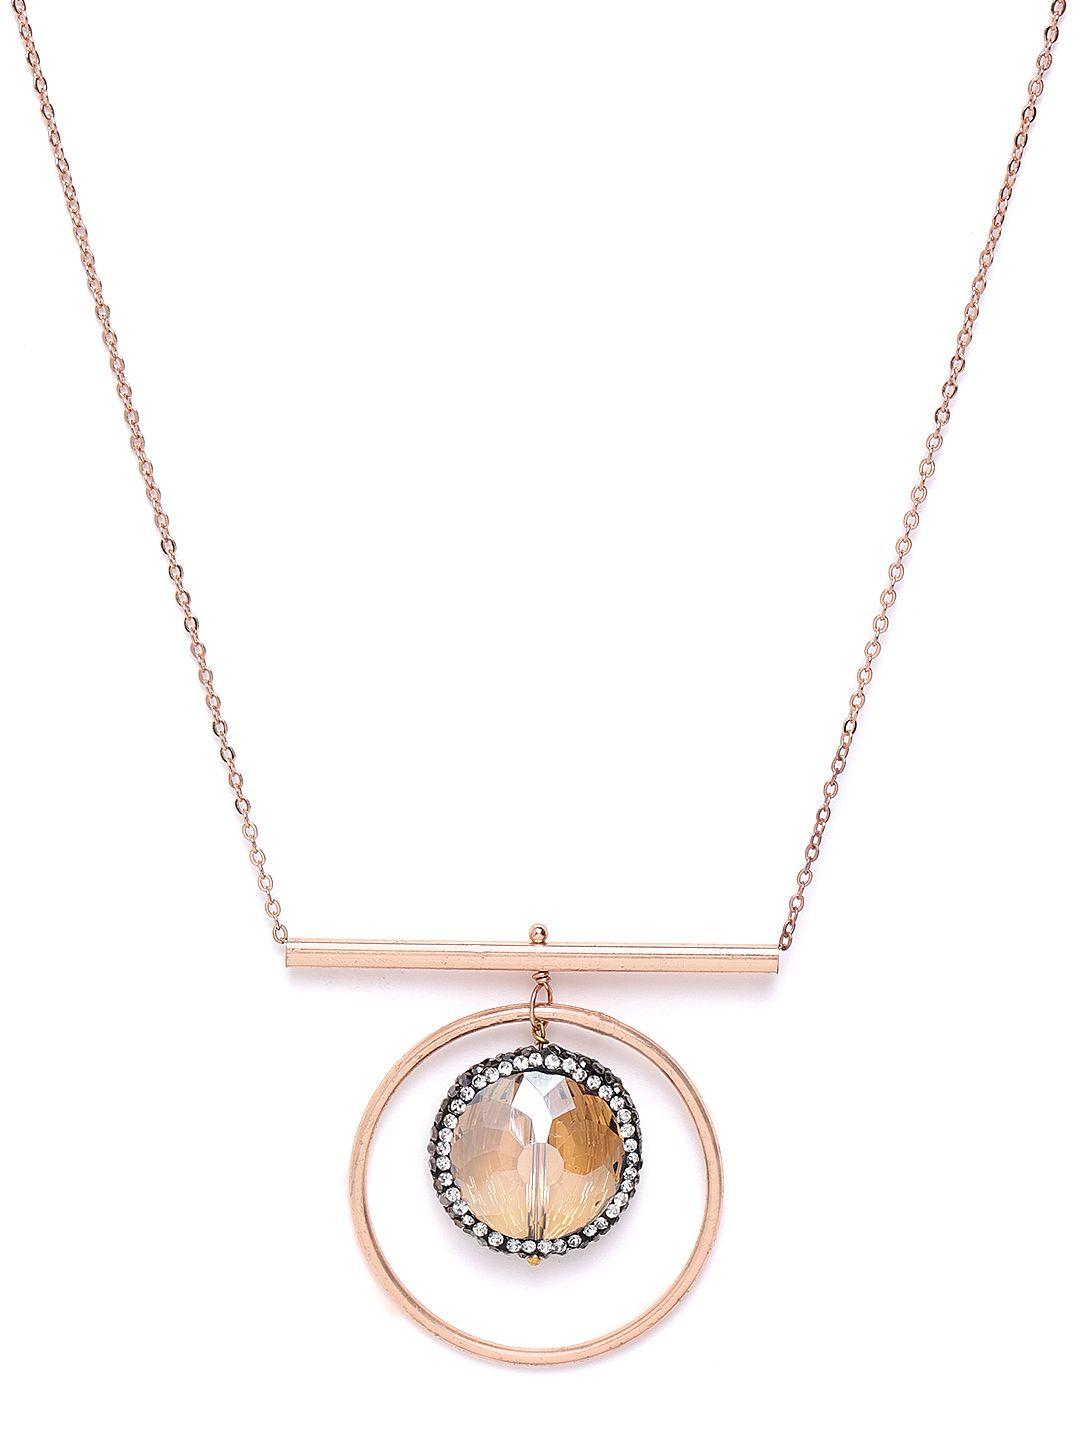 diva walk exclusive rose gold-toned stone-studded necklace